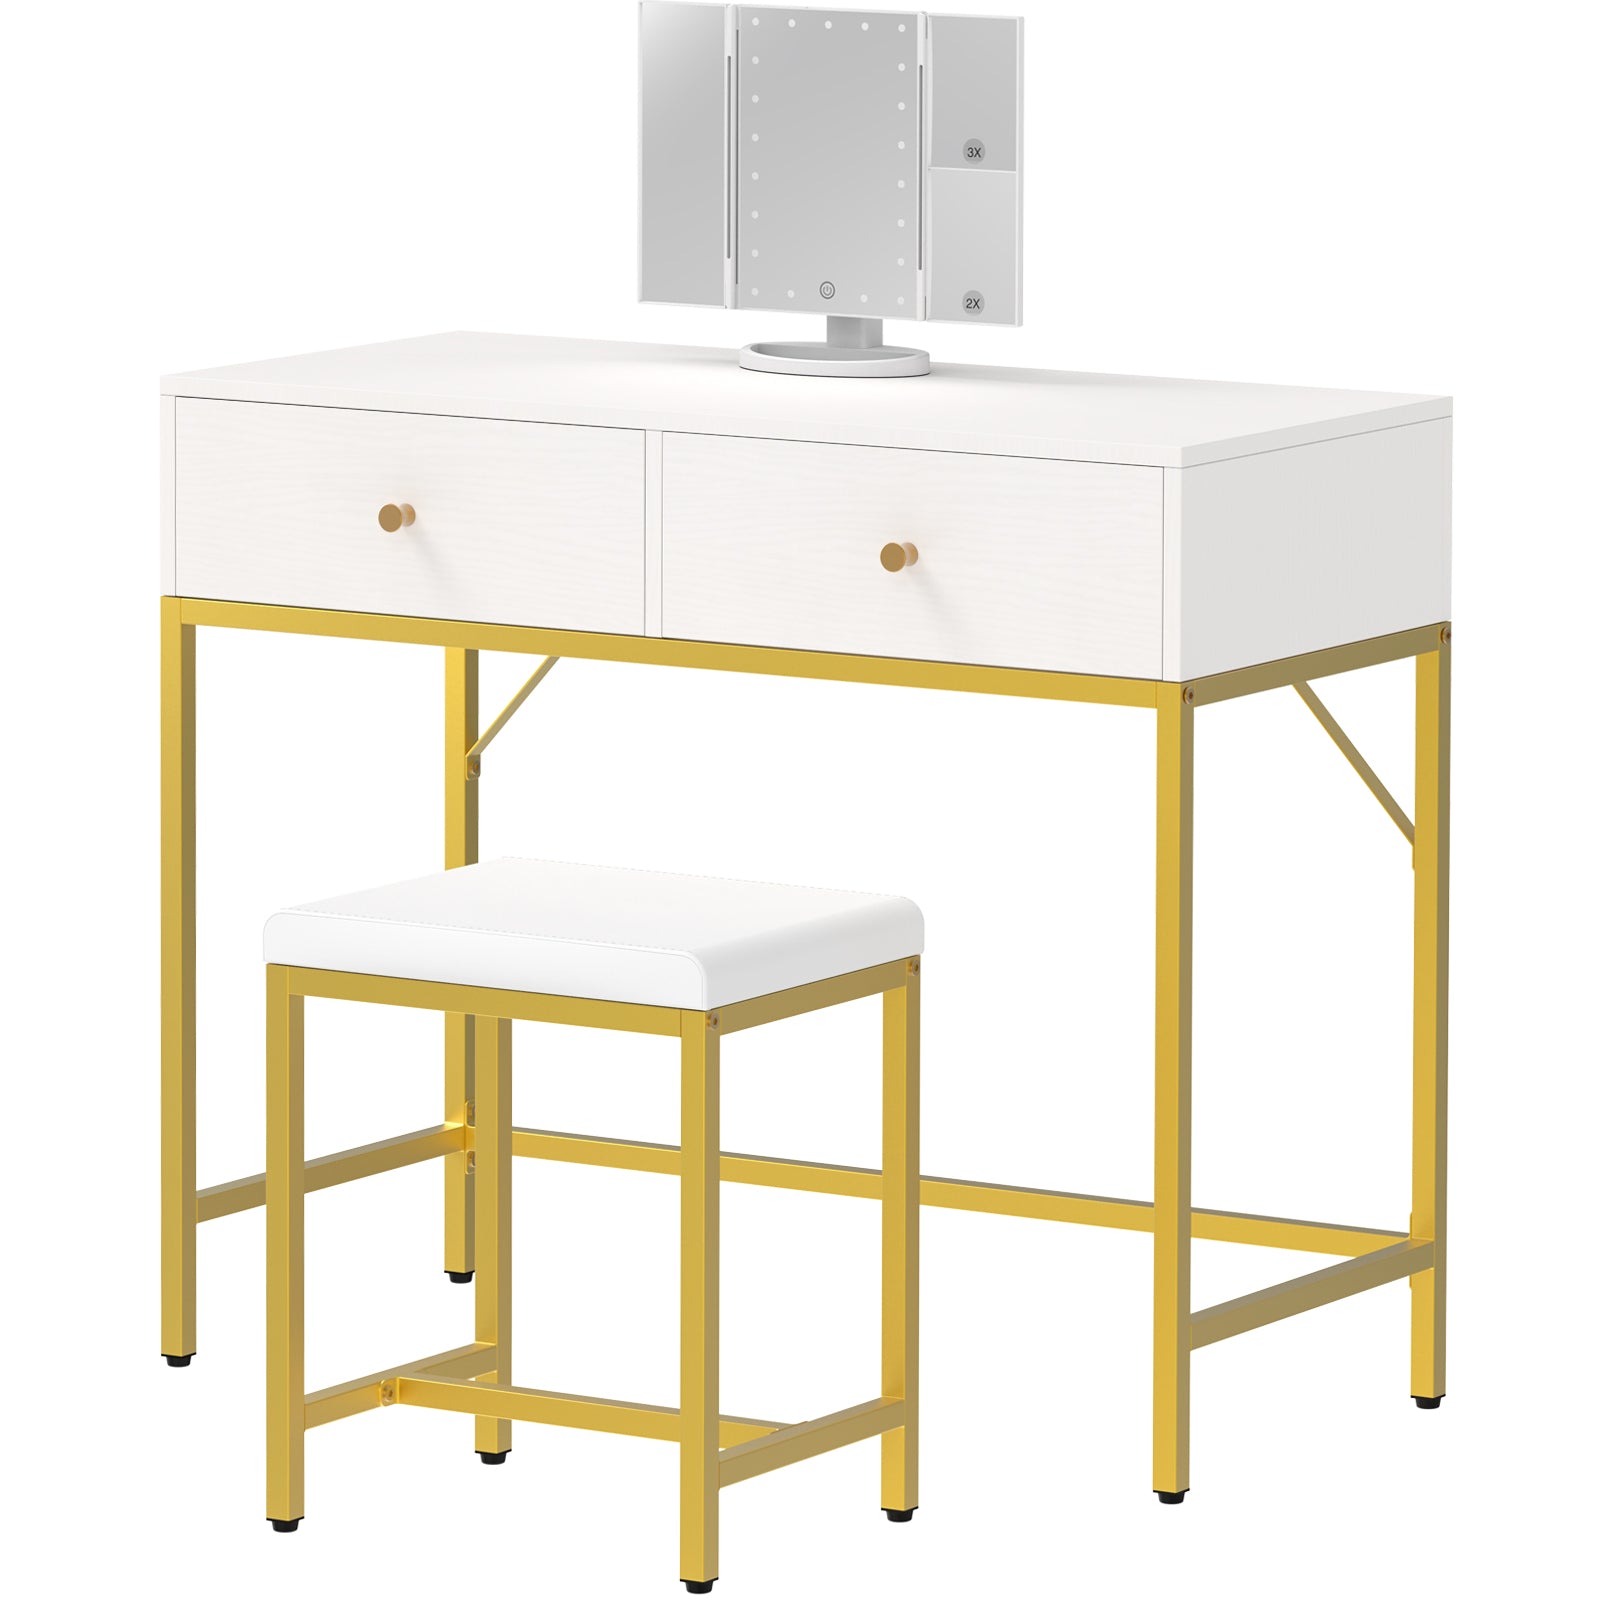  SUPERJARE 35.4 White and Gold Desk with 2 Drawers, Modern  Makeup Vanity Desk with Padded Stool, Small Computer Desk Home Office Desk  for Writing Study Bedroom : Home & Kitchen